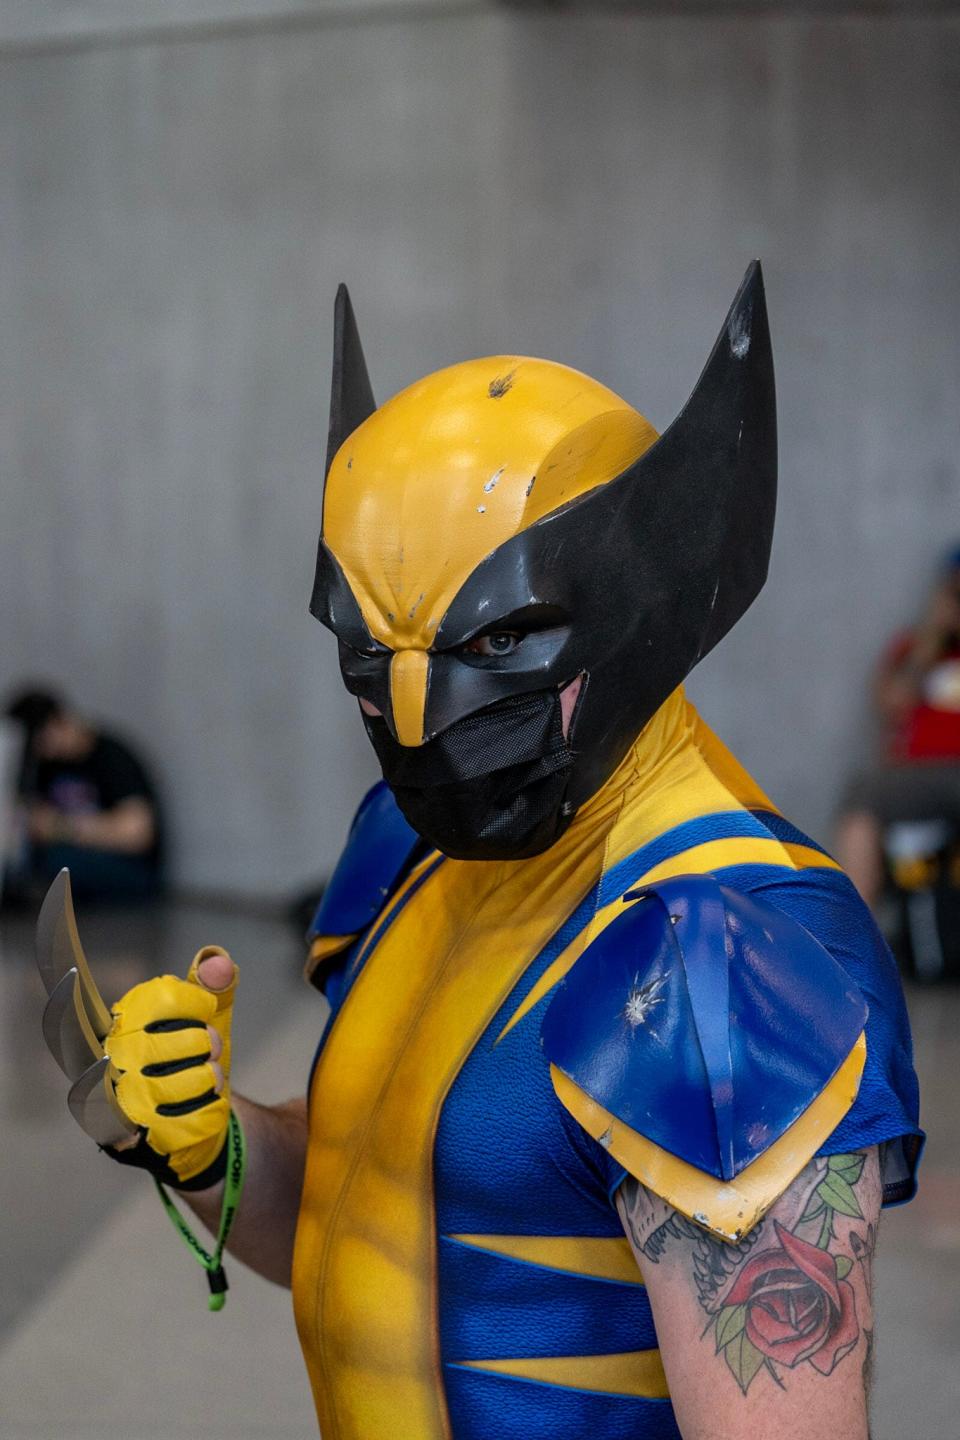 A cosplayer dressed as Wolverine at New York Comic Con 2021.